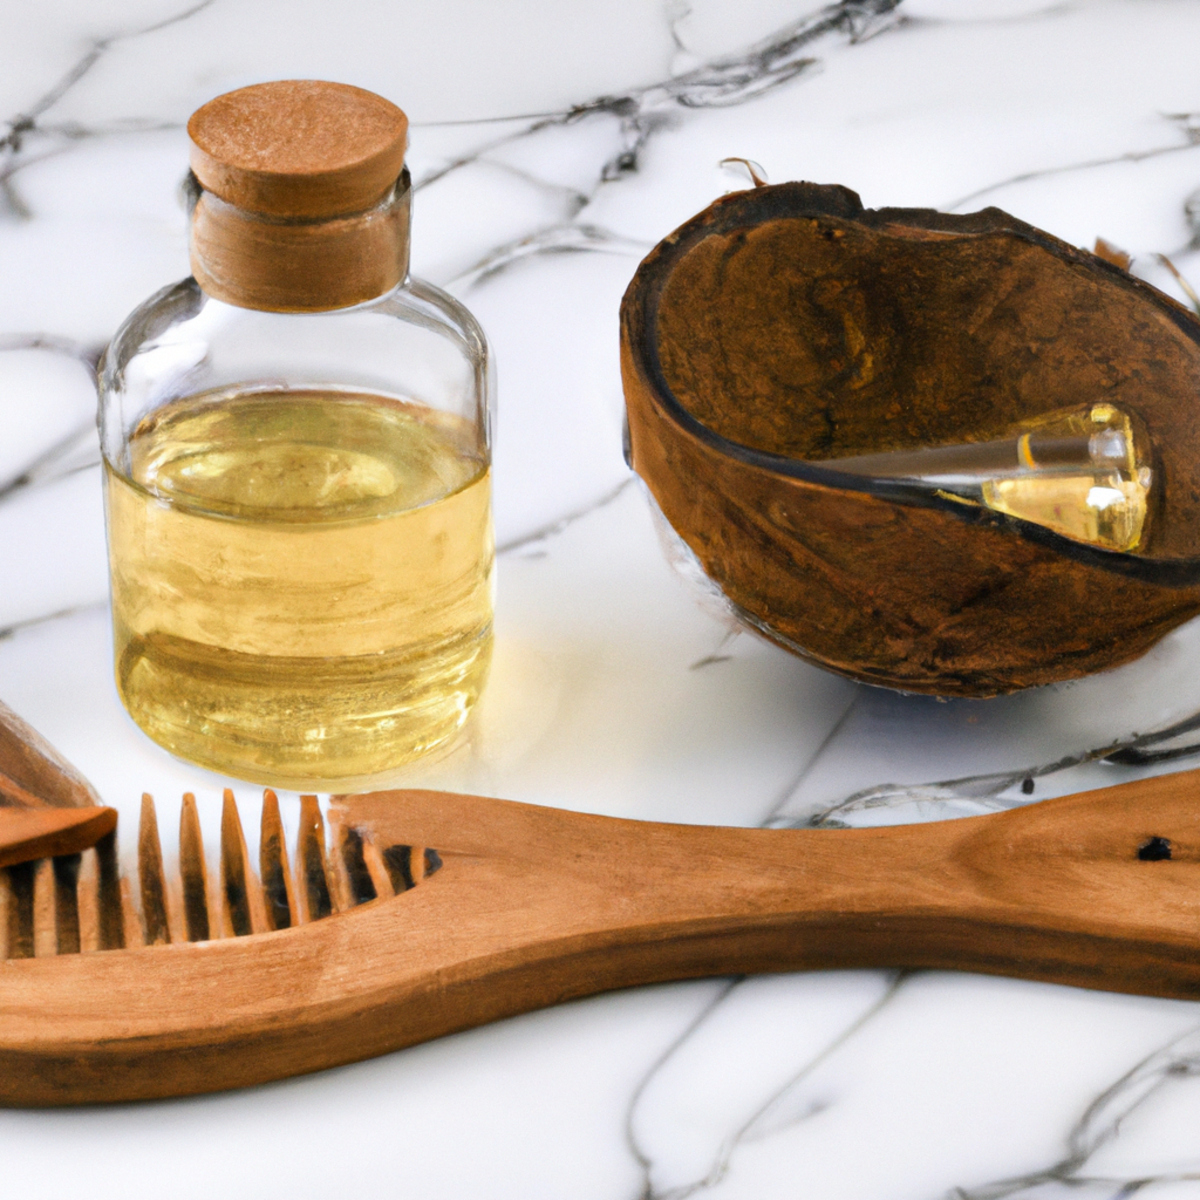 Wooden comb, argan oil, and coconut oil on marble surface. Hair care made easy with natural ingredients.